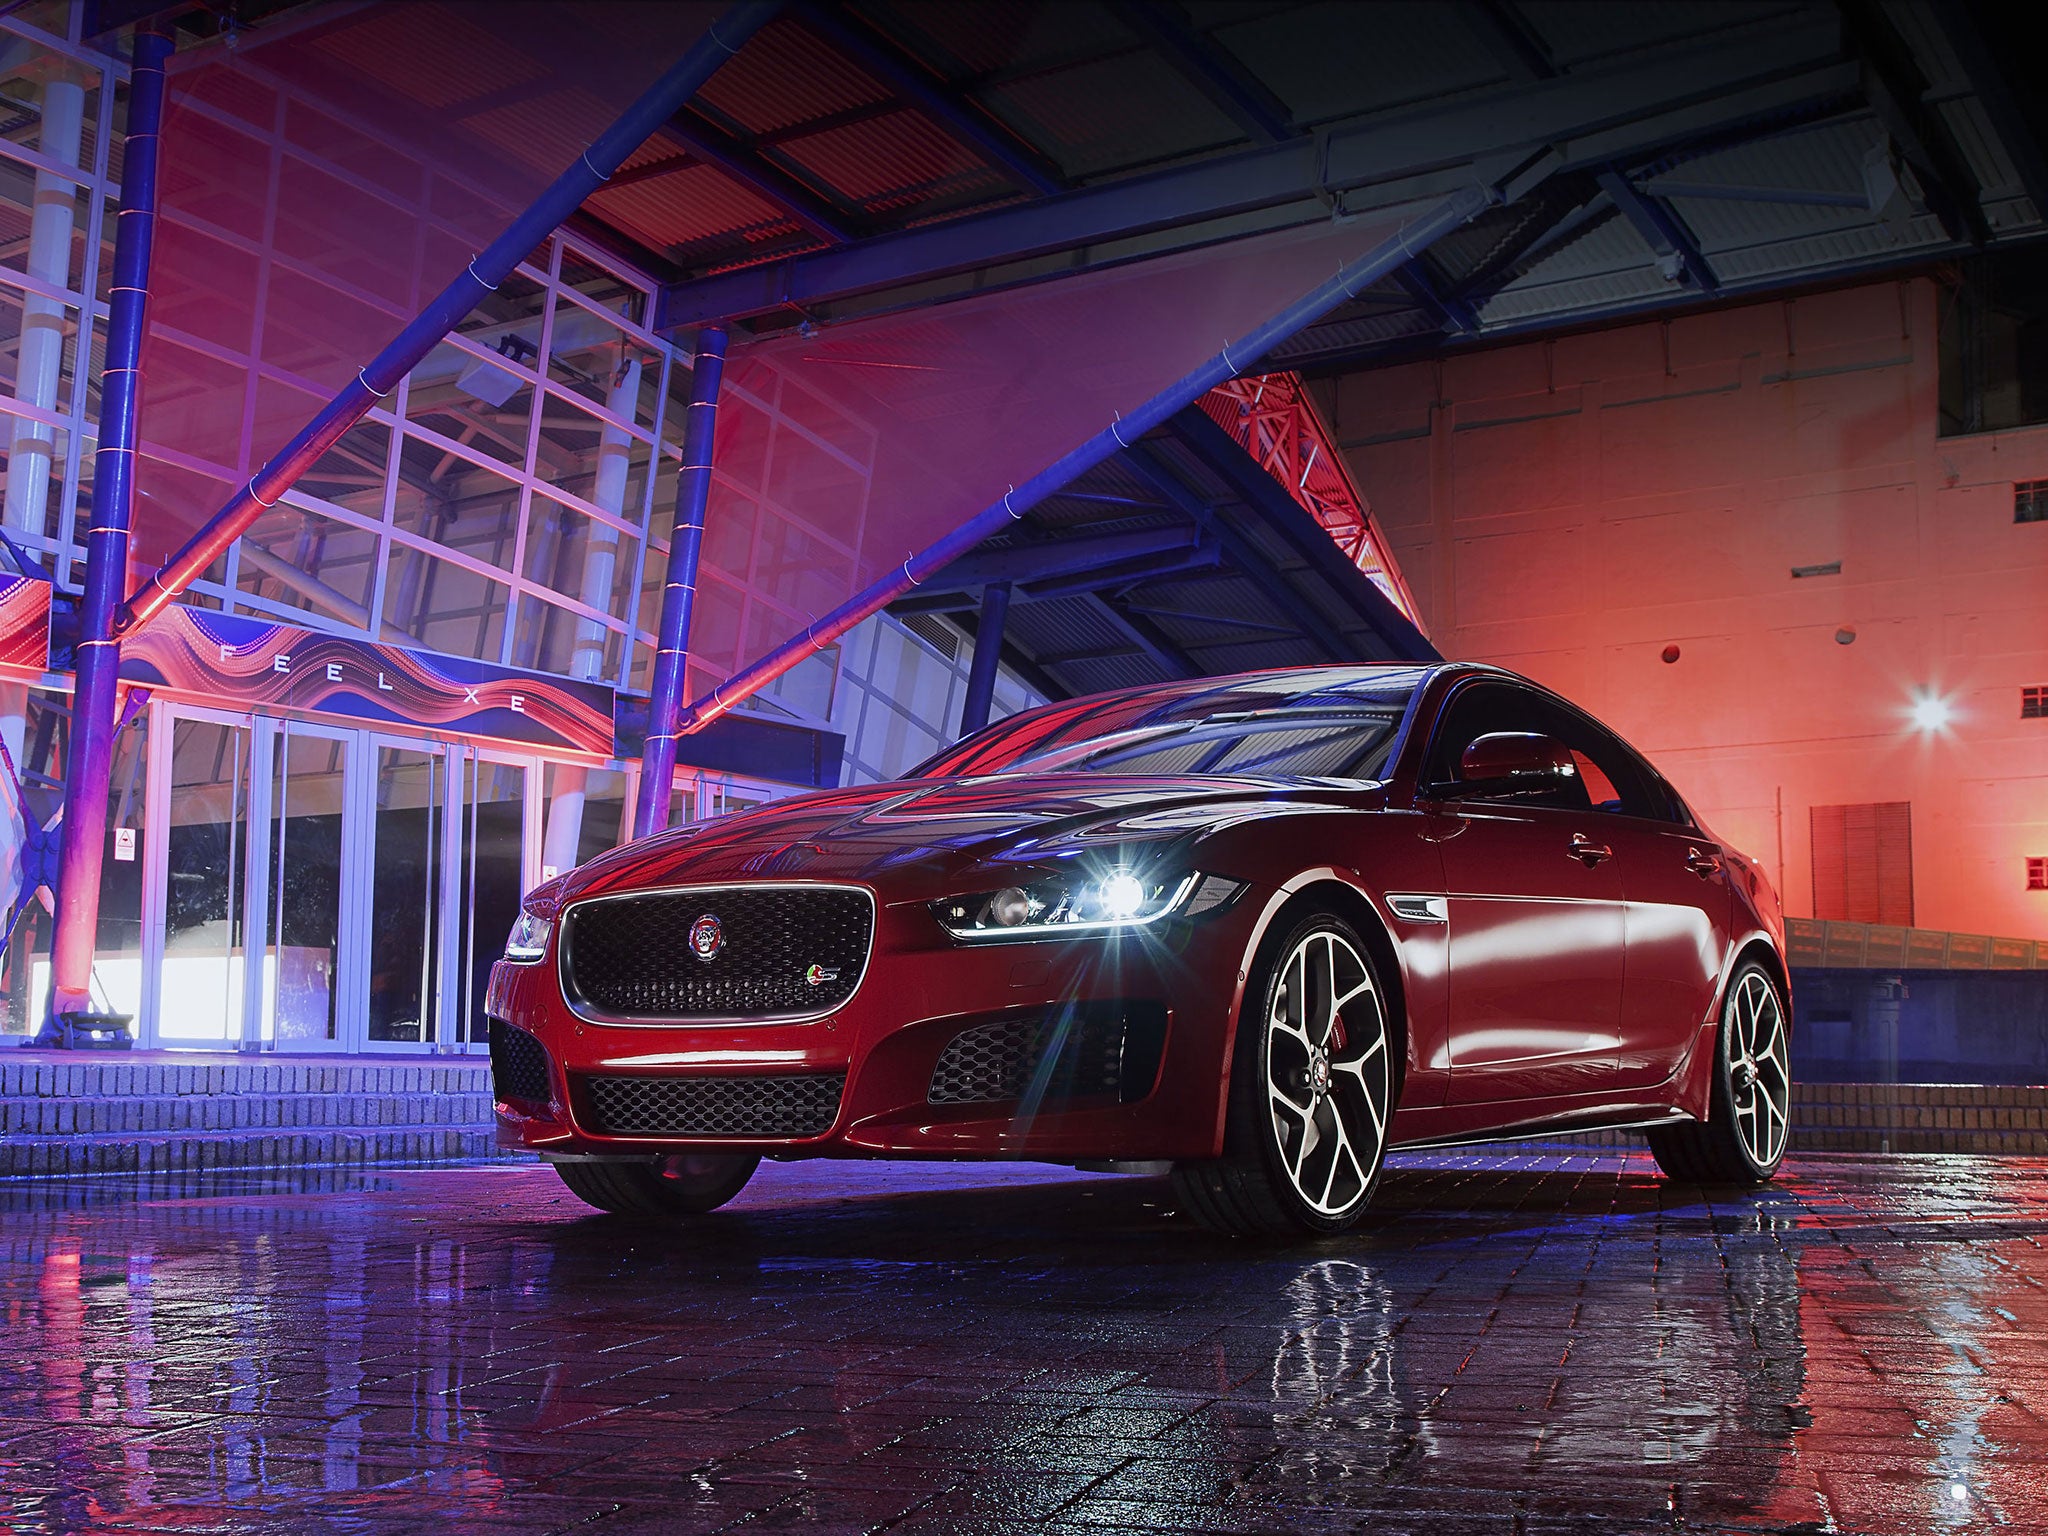 Jaguar is hoping to boost its sales following the launch of its new XE model, nicknamed ‘Baby Jag’